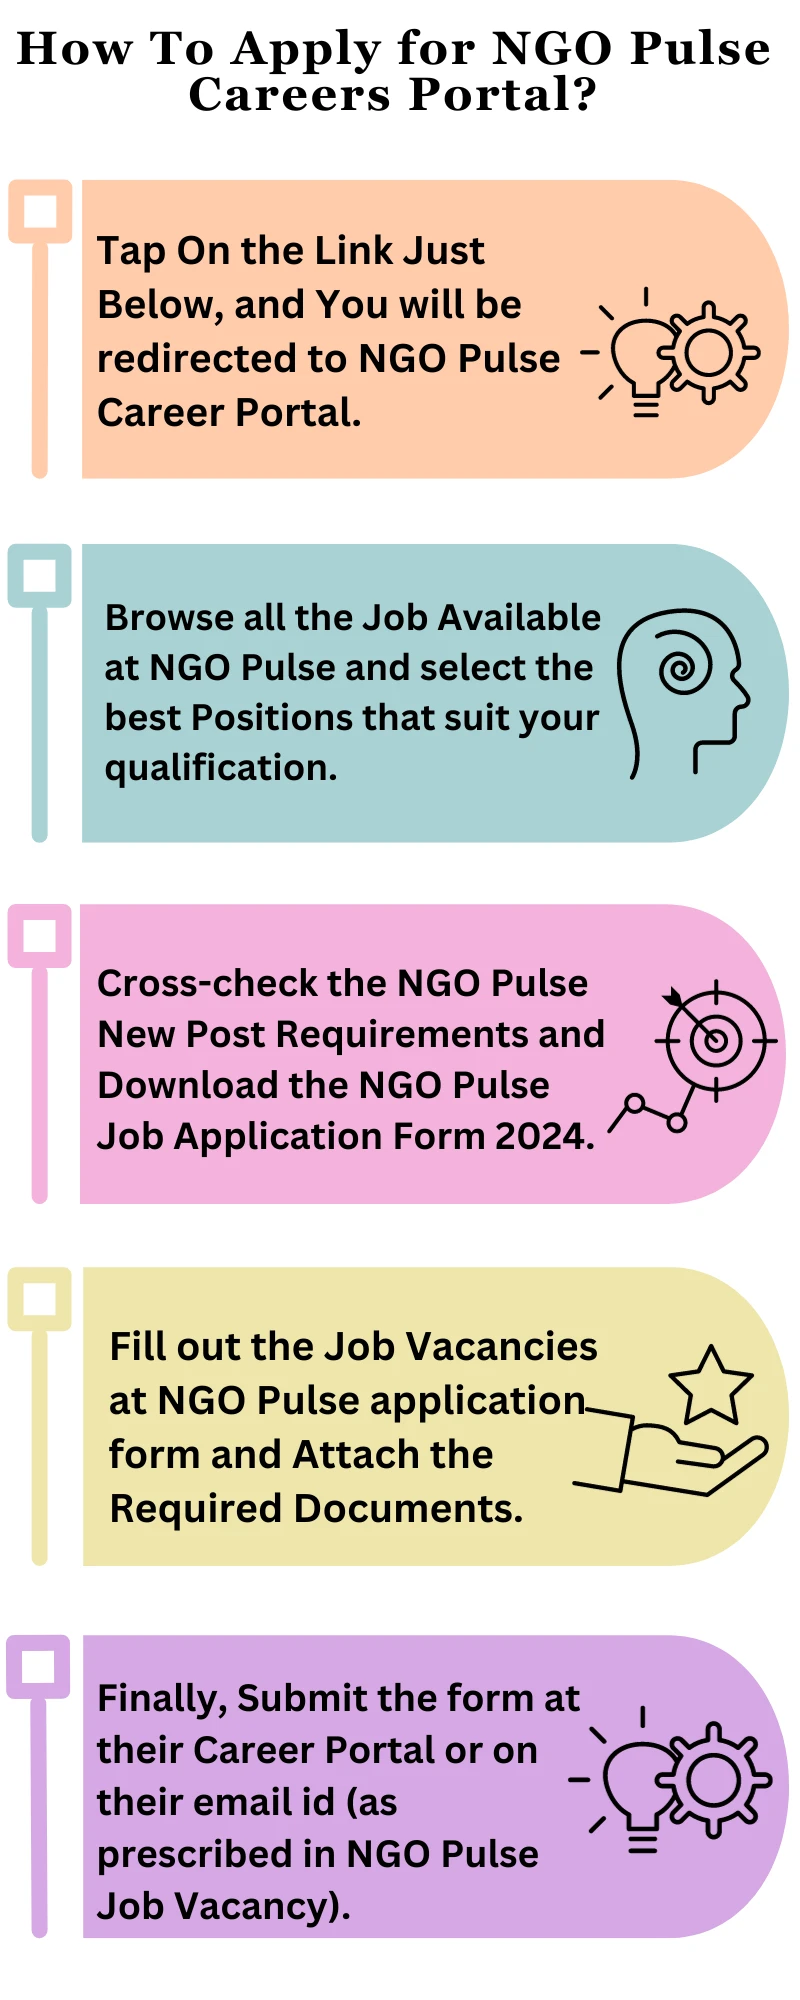 How To Apply for NGO Pulse Careers Portal?